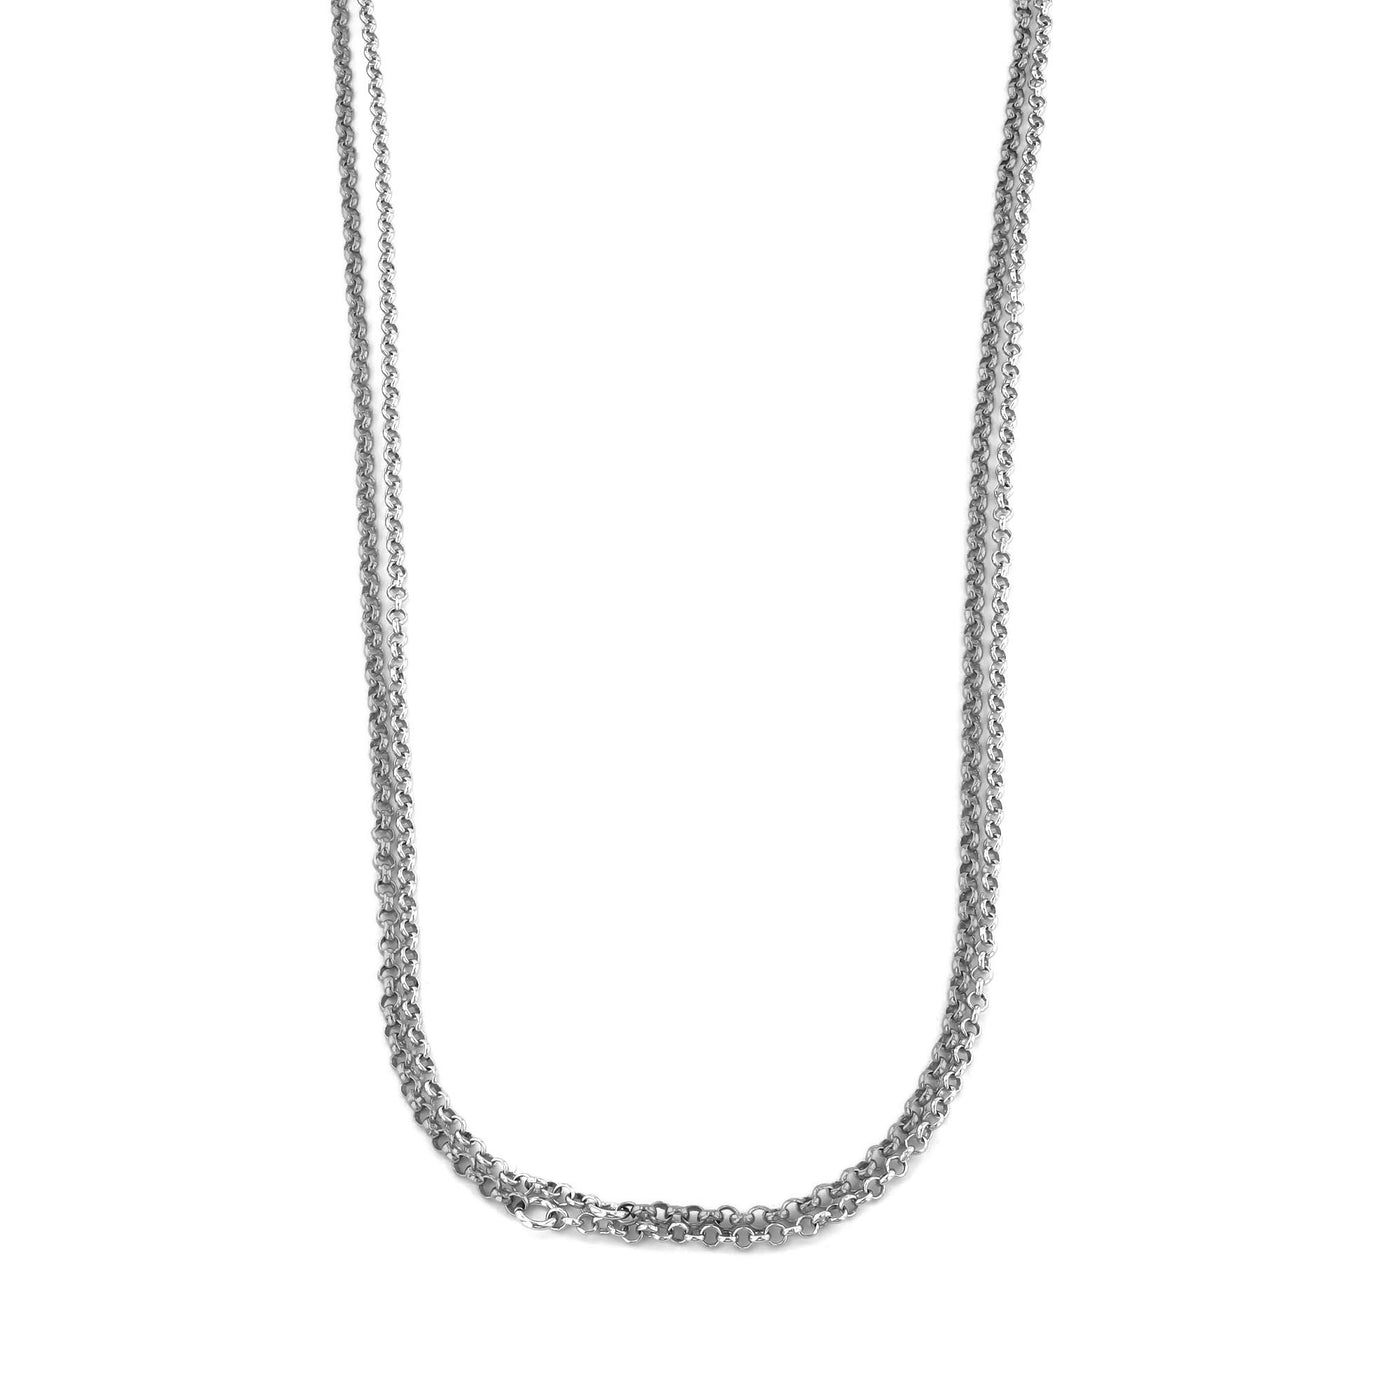 Rebecca Sloane Rhodium Plated Silver 48 inch Chain Link Necklace